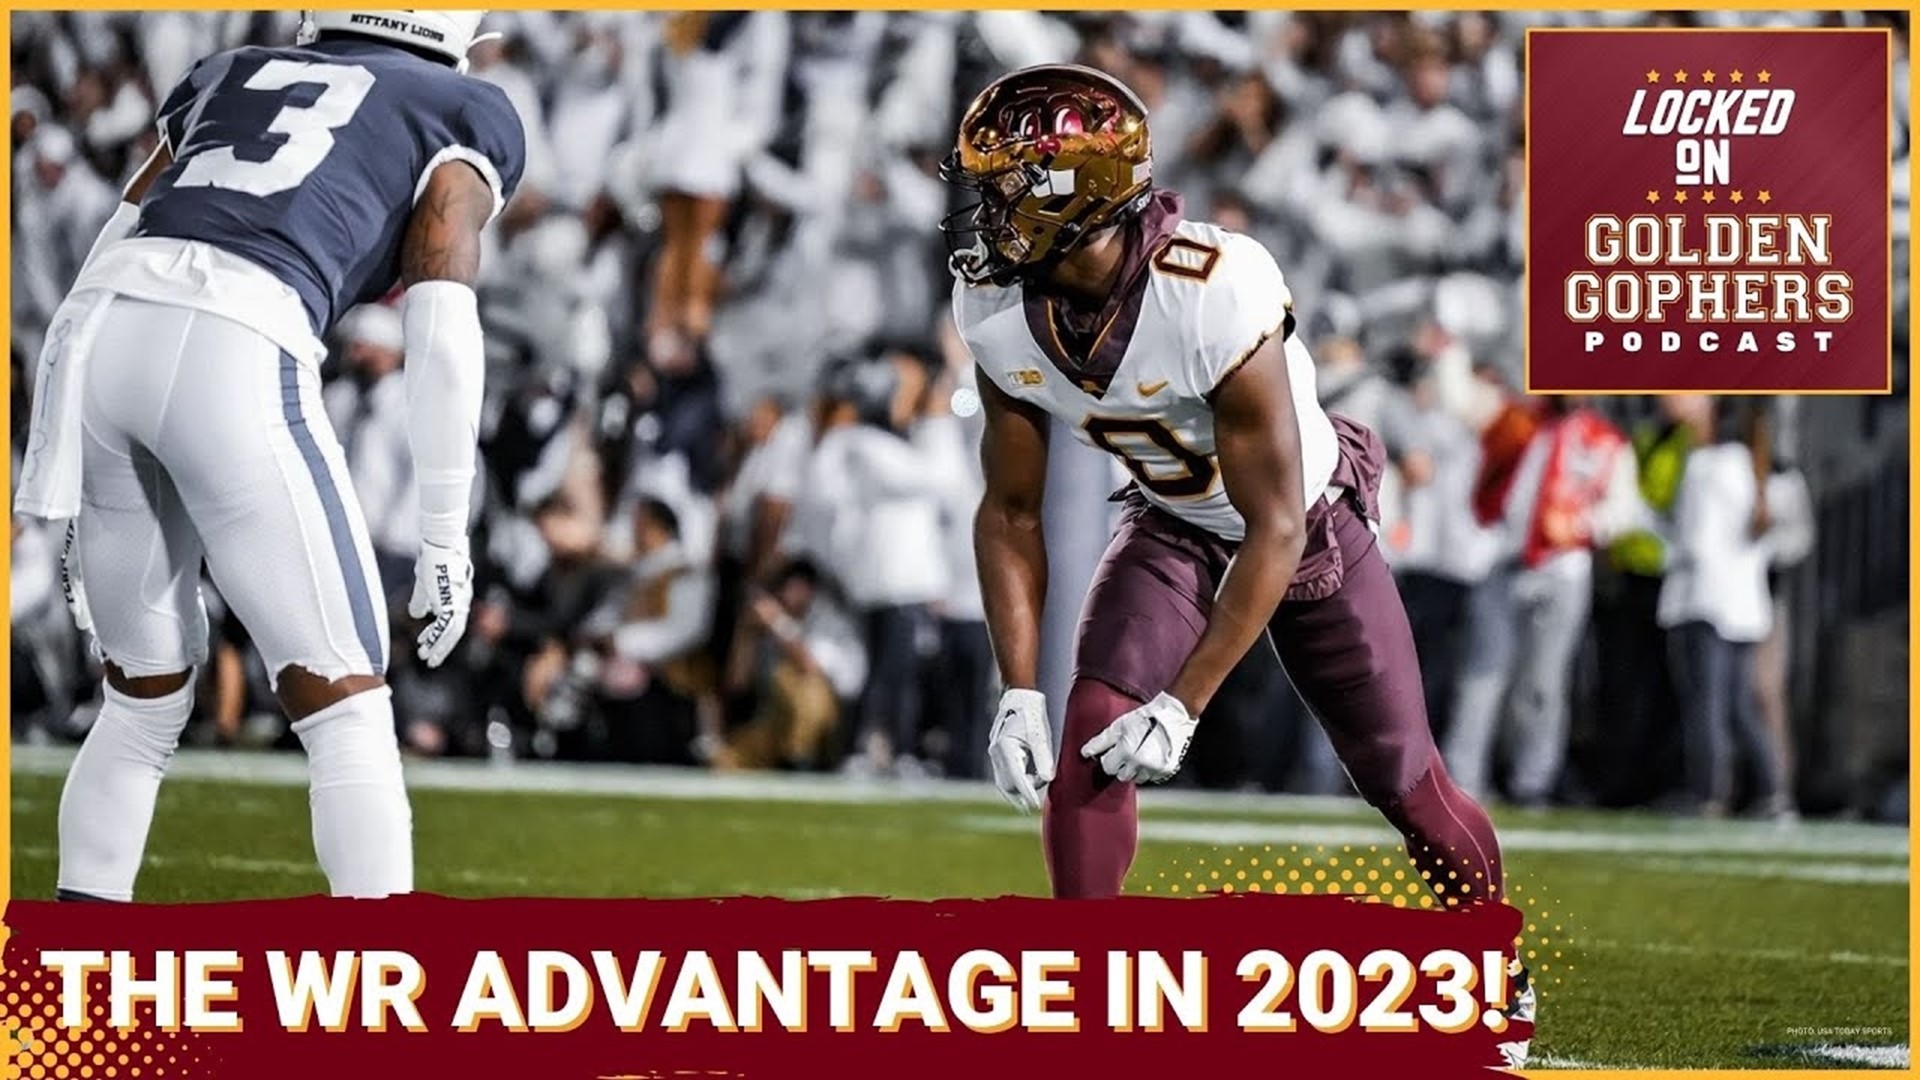 On today's show we discuss the talent and depth for the Gophers wide receiver room and how it could all play out in 2023.